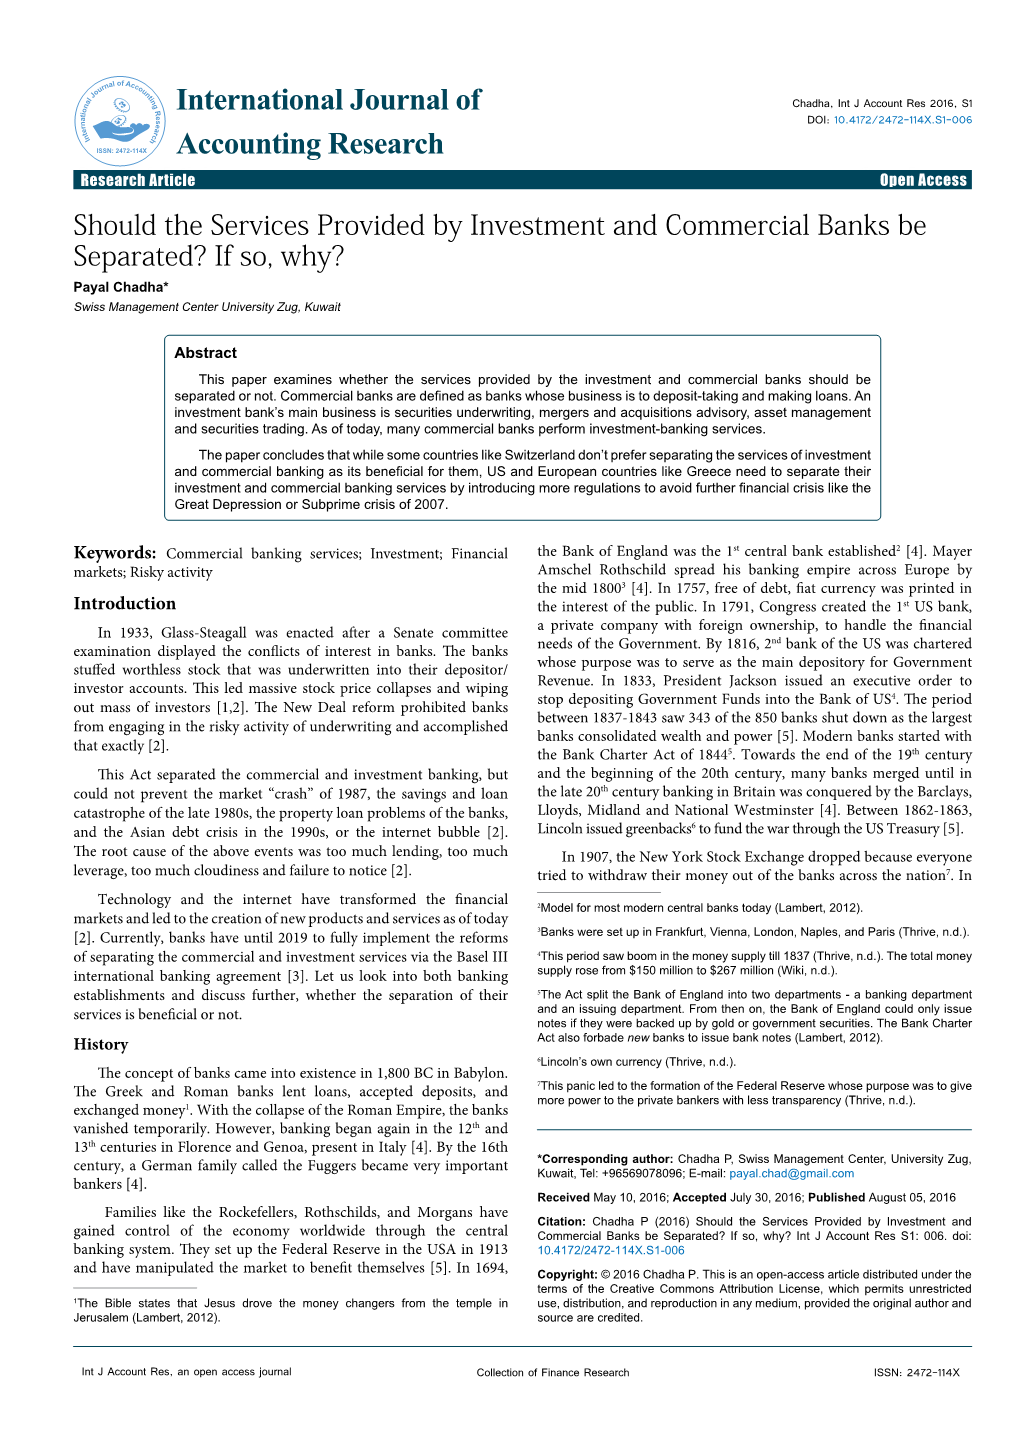 Should the Services Provided by Investment and Commercial Banks Be Separated? If So, Why? Payal Chadha* Swiss Management Center University Zug, Kuwait